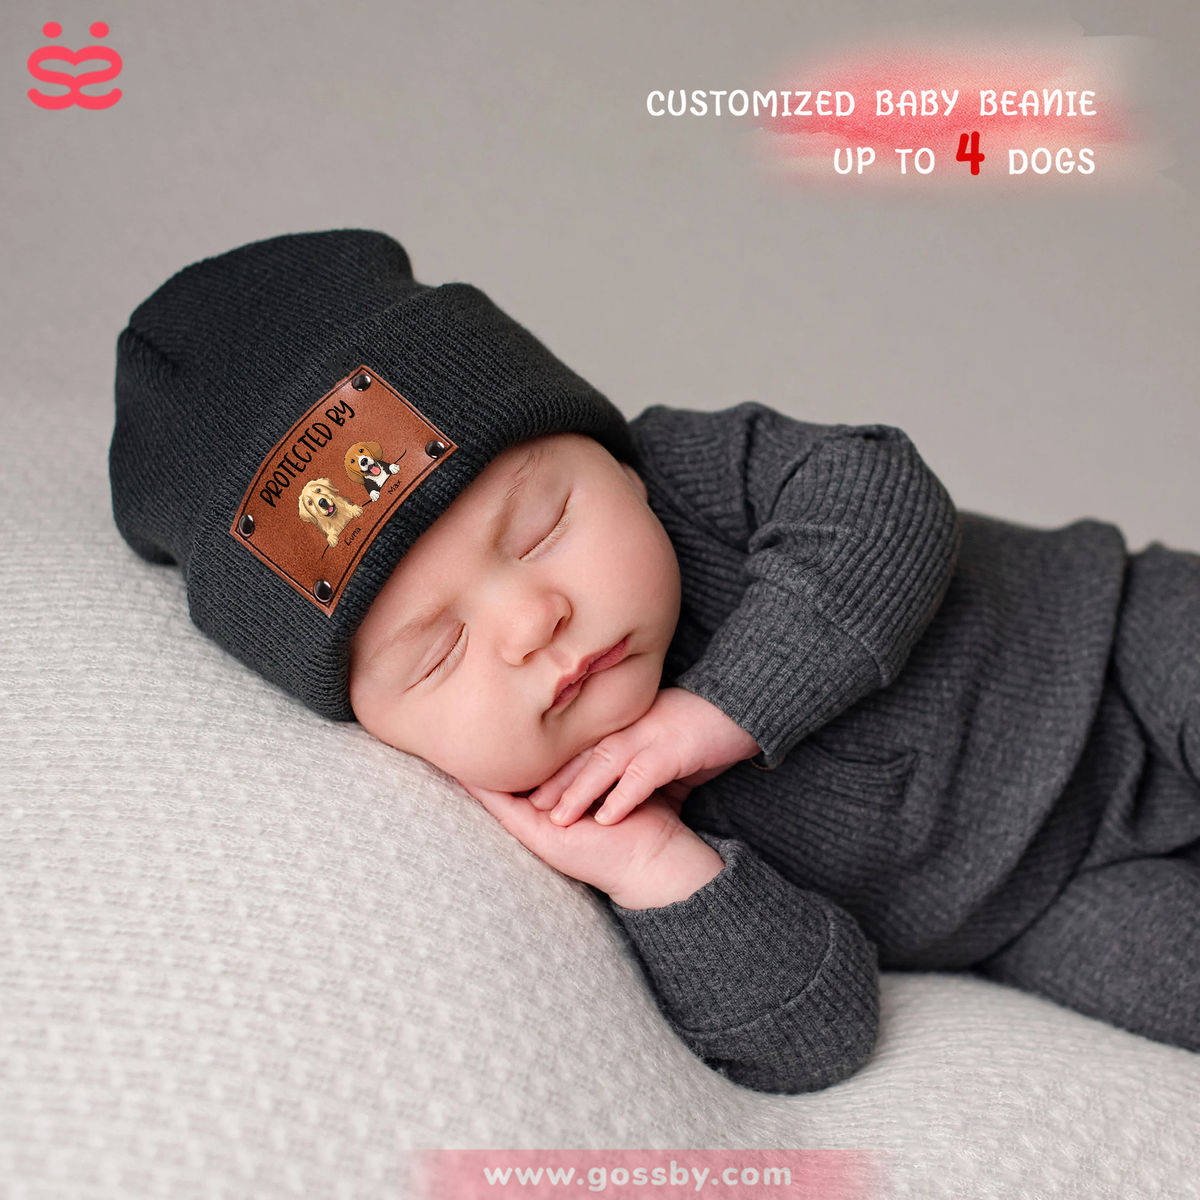 Custom Baby Beanie - Protected By Dogs - Cute Baby Shower Gift (M1)_3